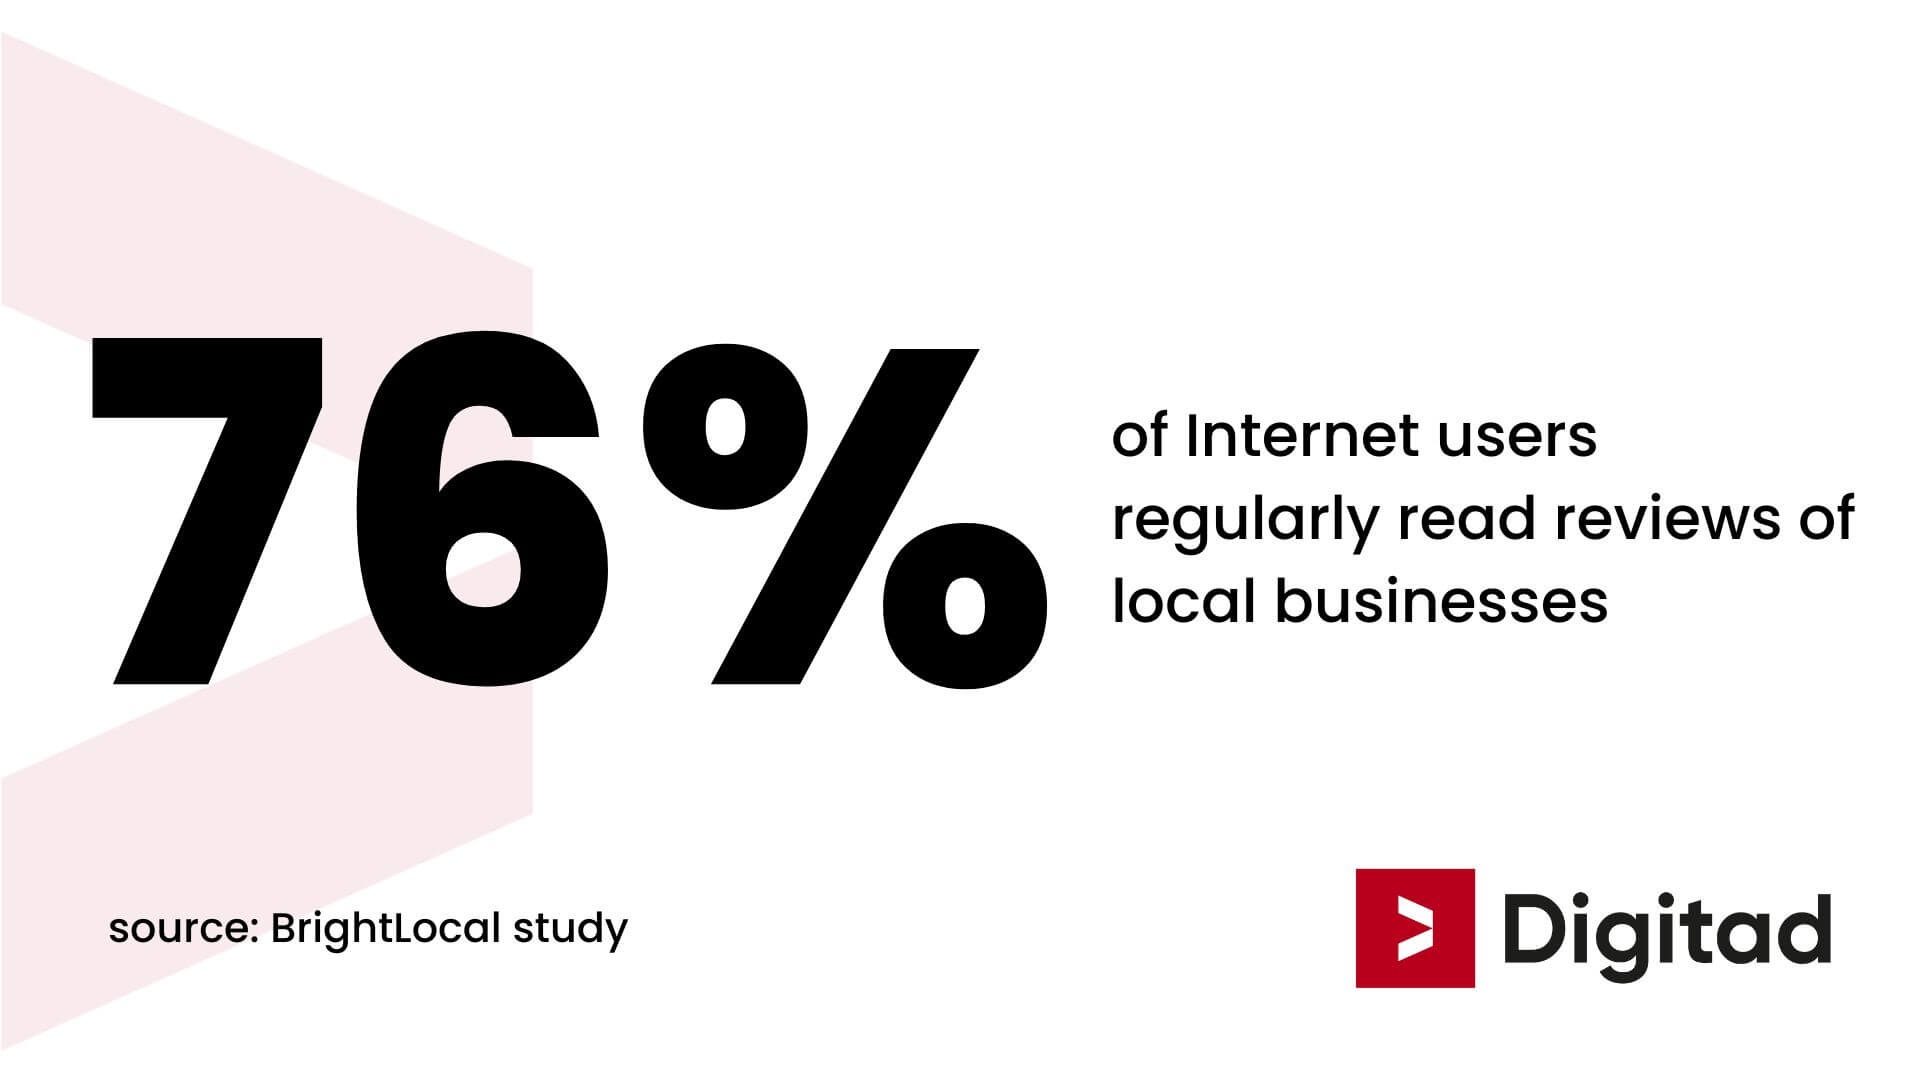 76% of Internet users regularly read reviews of local business